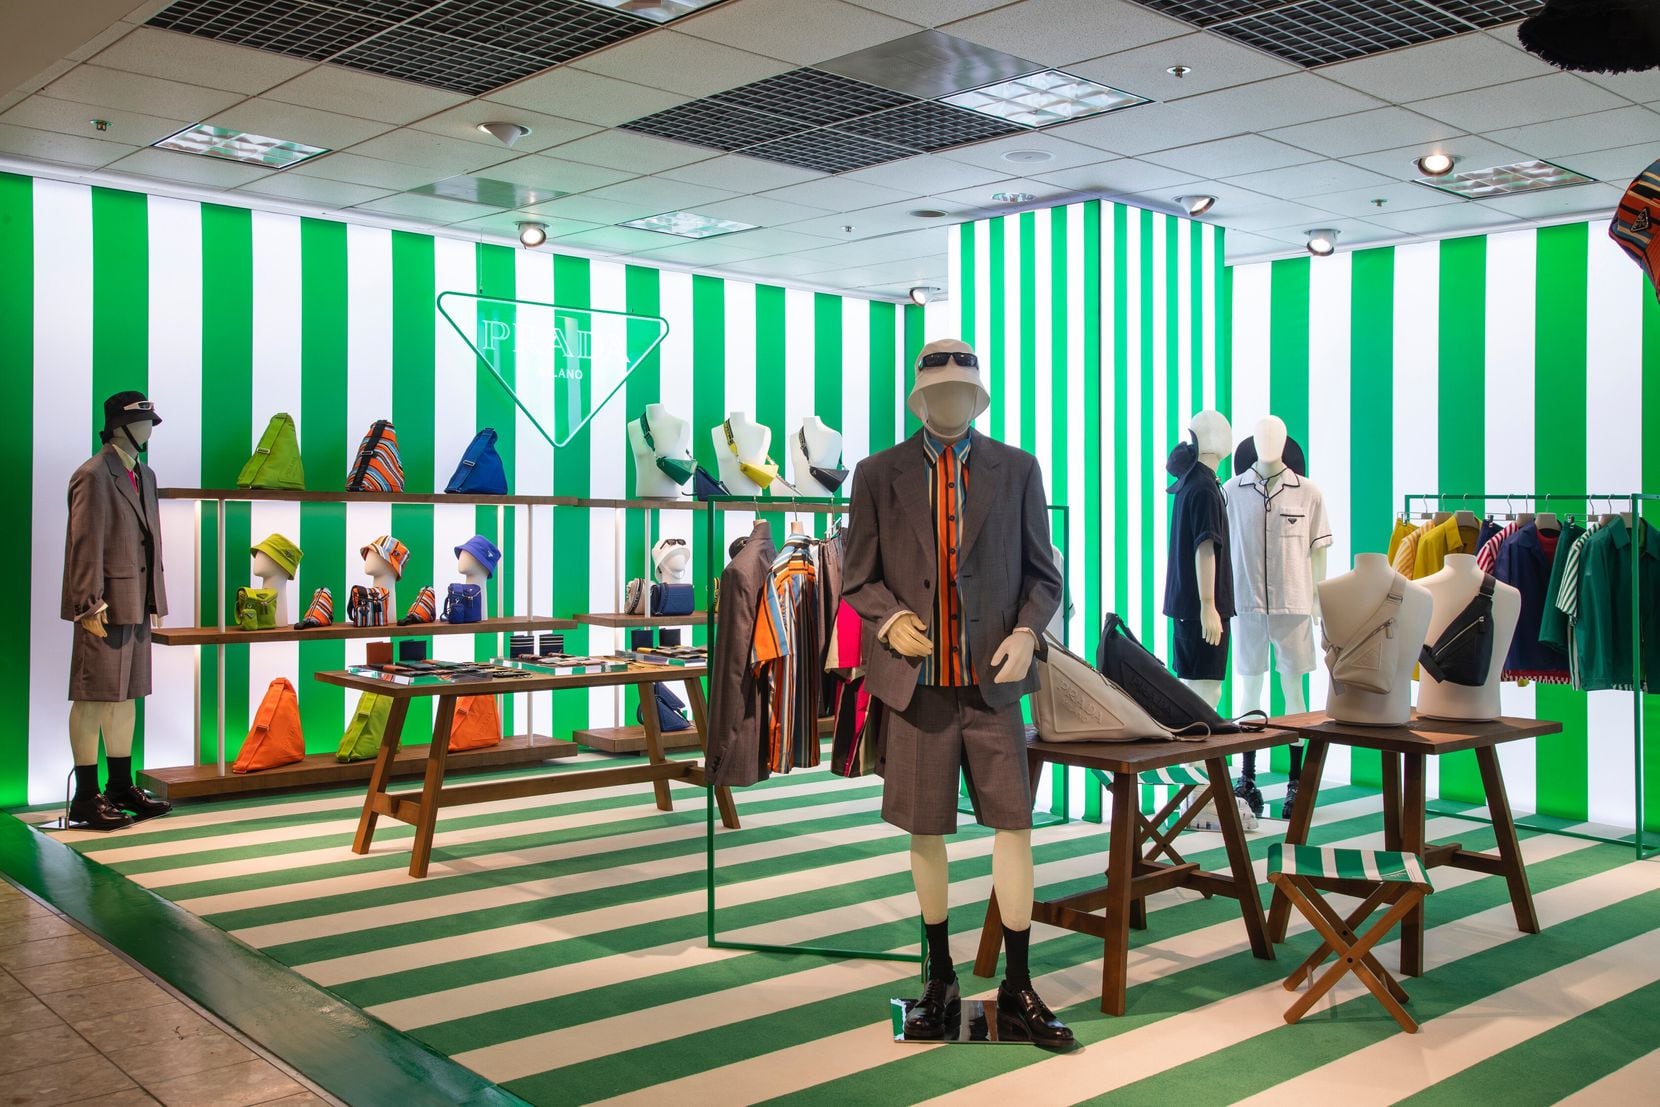 The Prada pop-up at the Neiman Marcus store in NorthPark Center was open from May 11 to June 1.